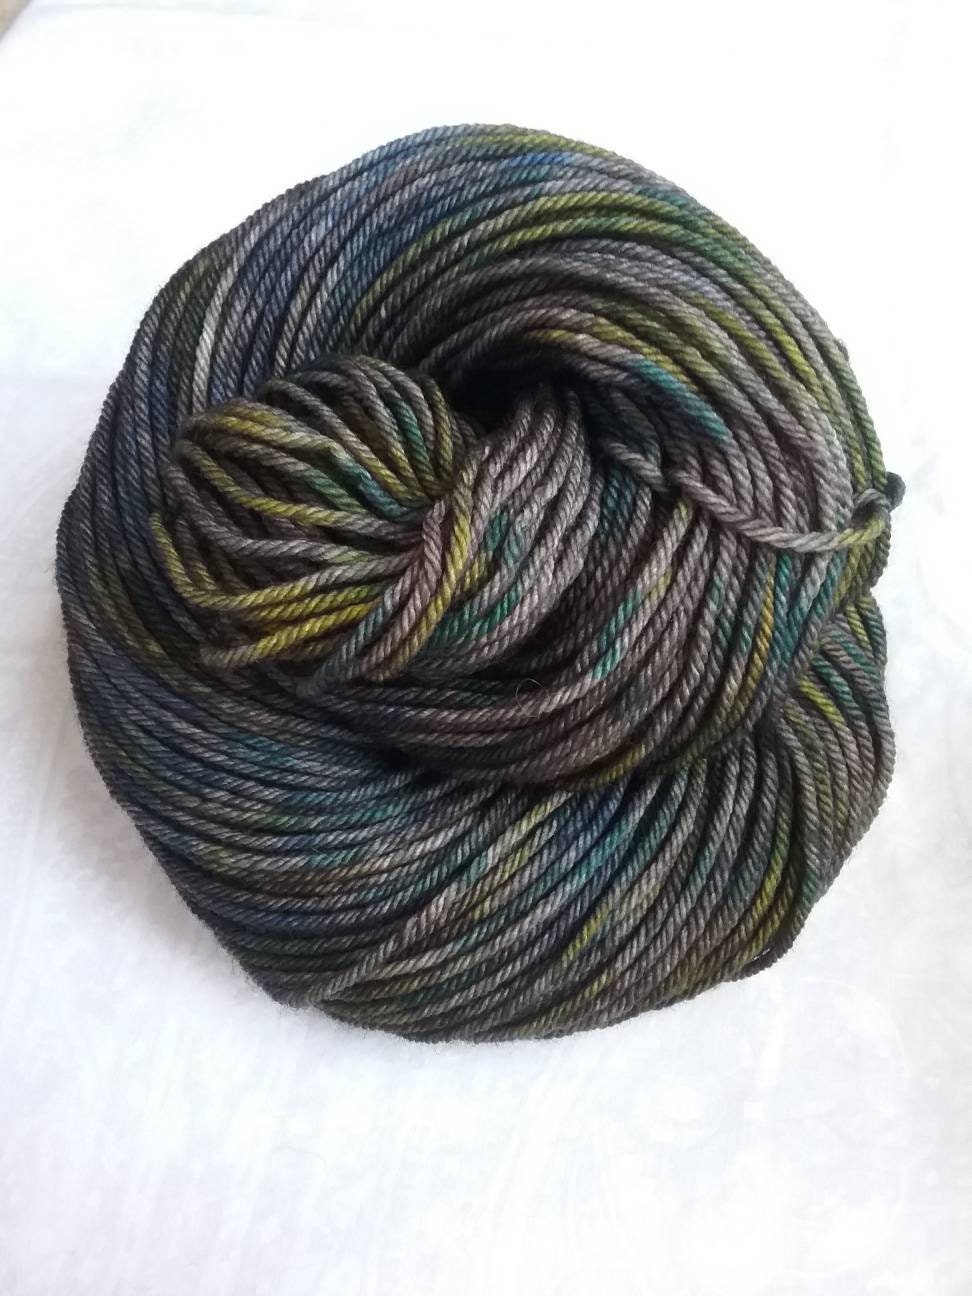 Worsted Weight Yarn, Hand Dyed, Speckled Yarn, Superwash Merino, Hand Dyed  Yarn 100 G/218 Yds/worsted Yarn Surprise Party 